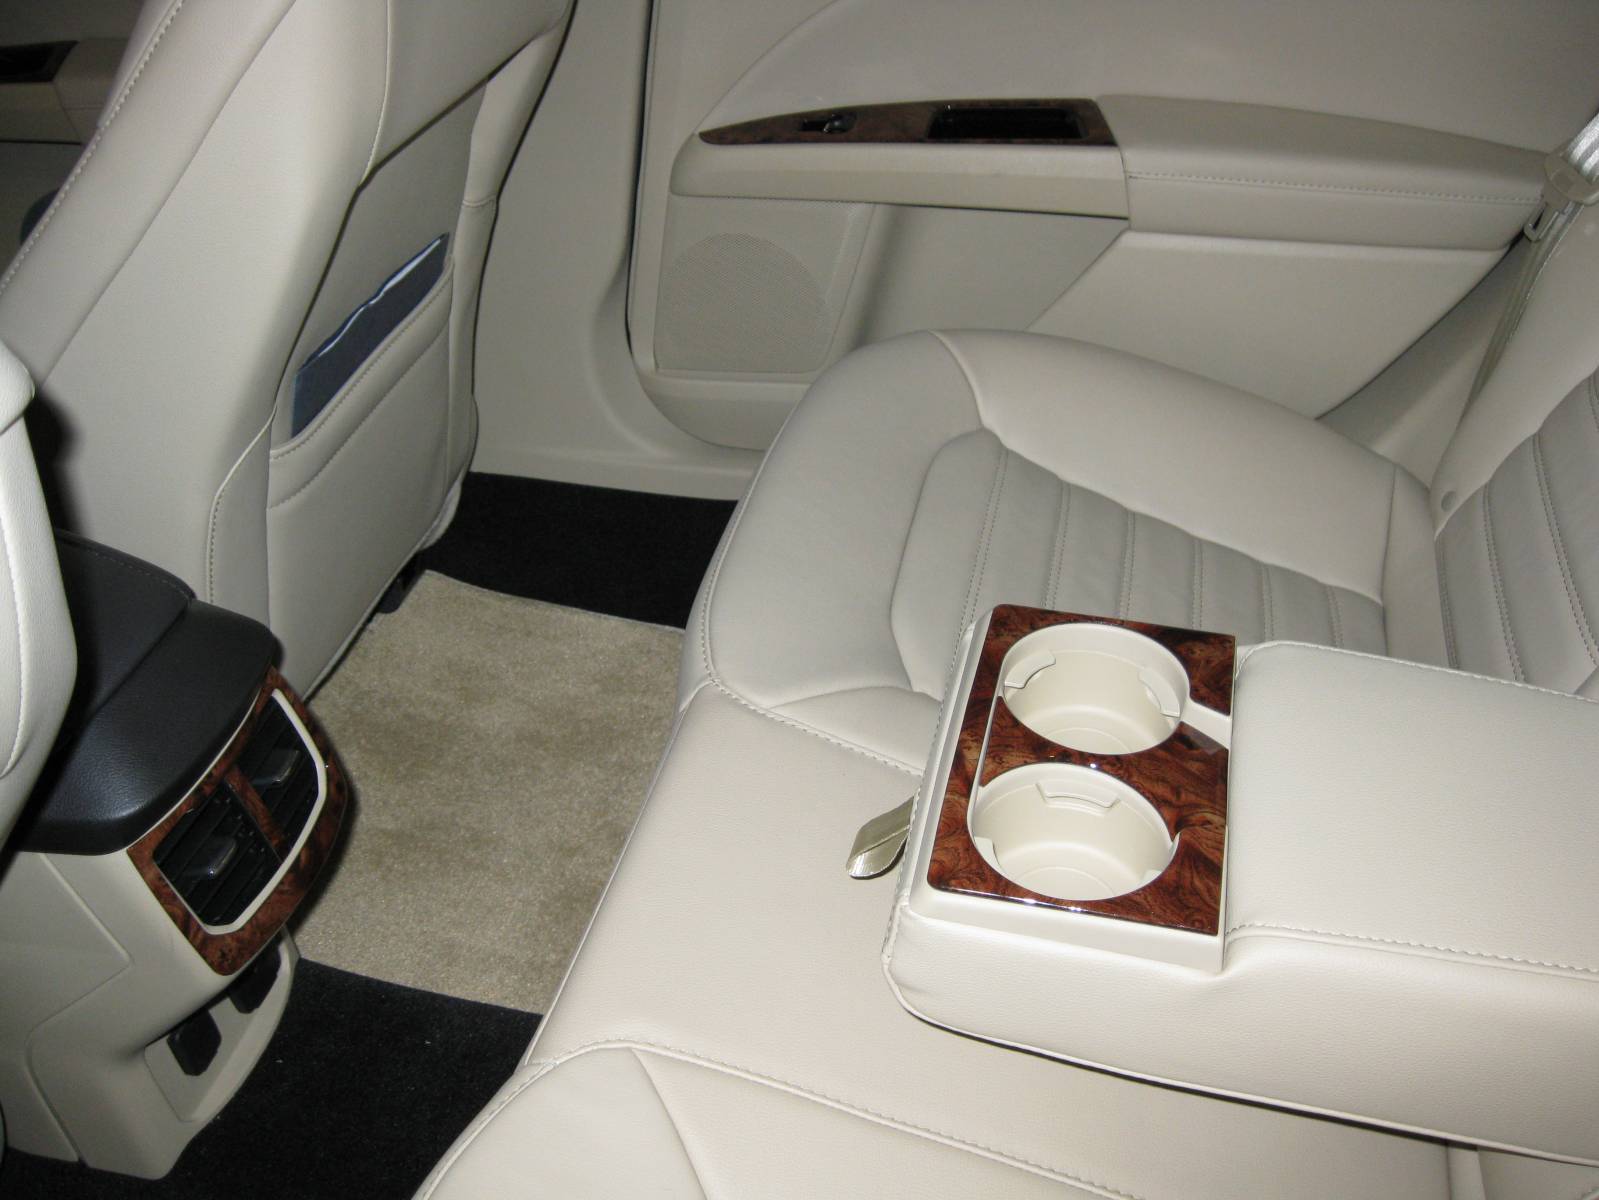 Backseat tray, door and console